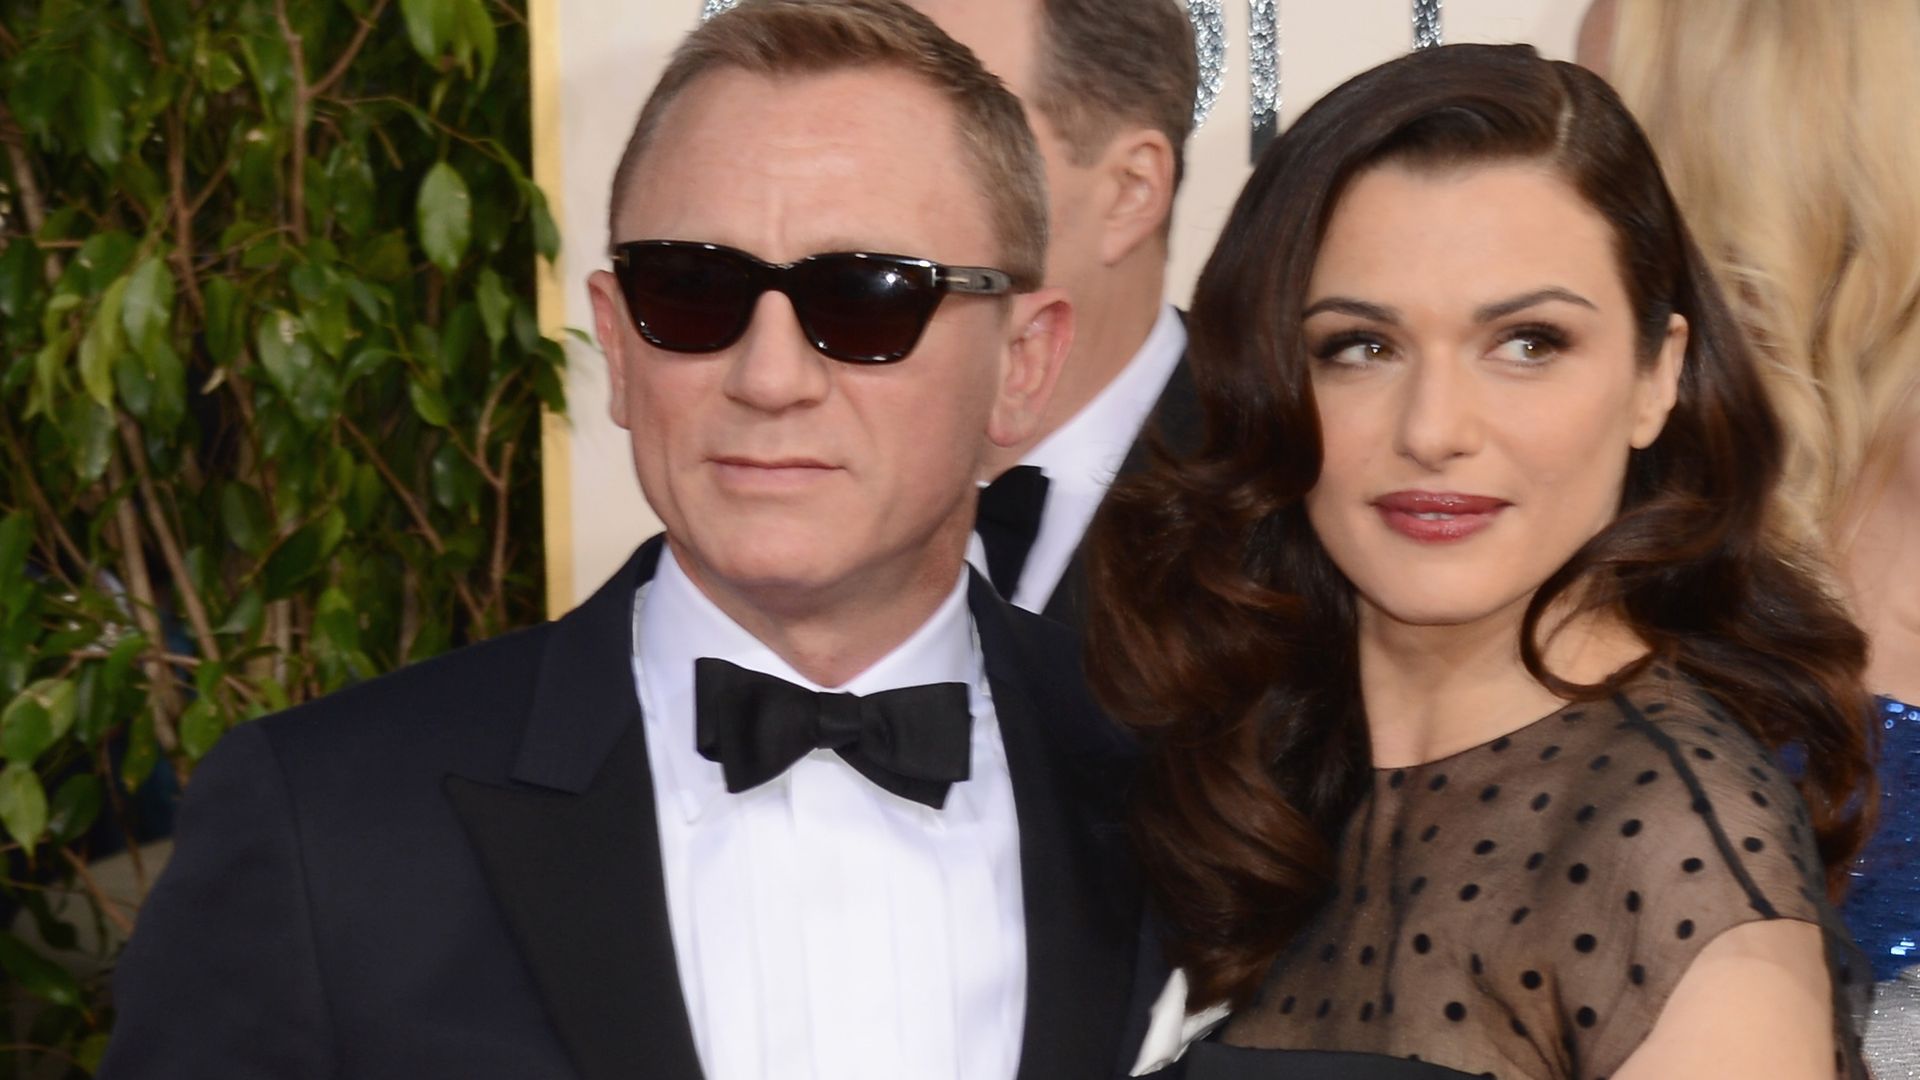 Daniel Craig and Rachel Weisz at the  70th Annual Golden Globe Awards held at The Beverly Hilton Hotel on January 13, 2013 